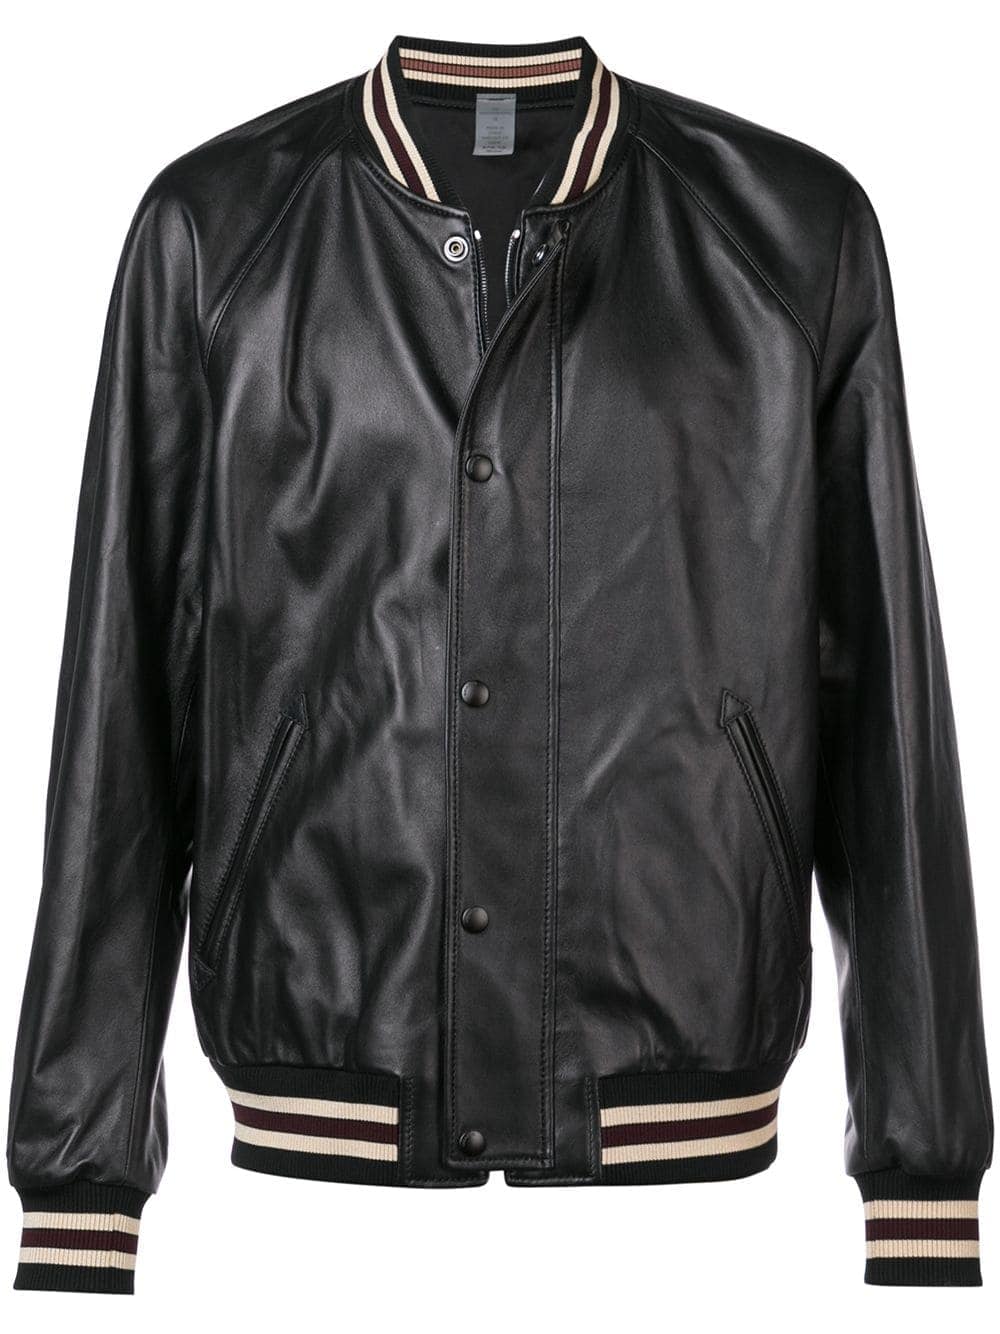 10 Leather Jackets To Buy Right Now | Men's Style Pro | Men's Style ...